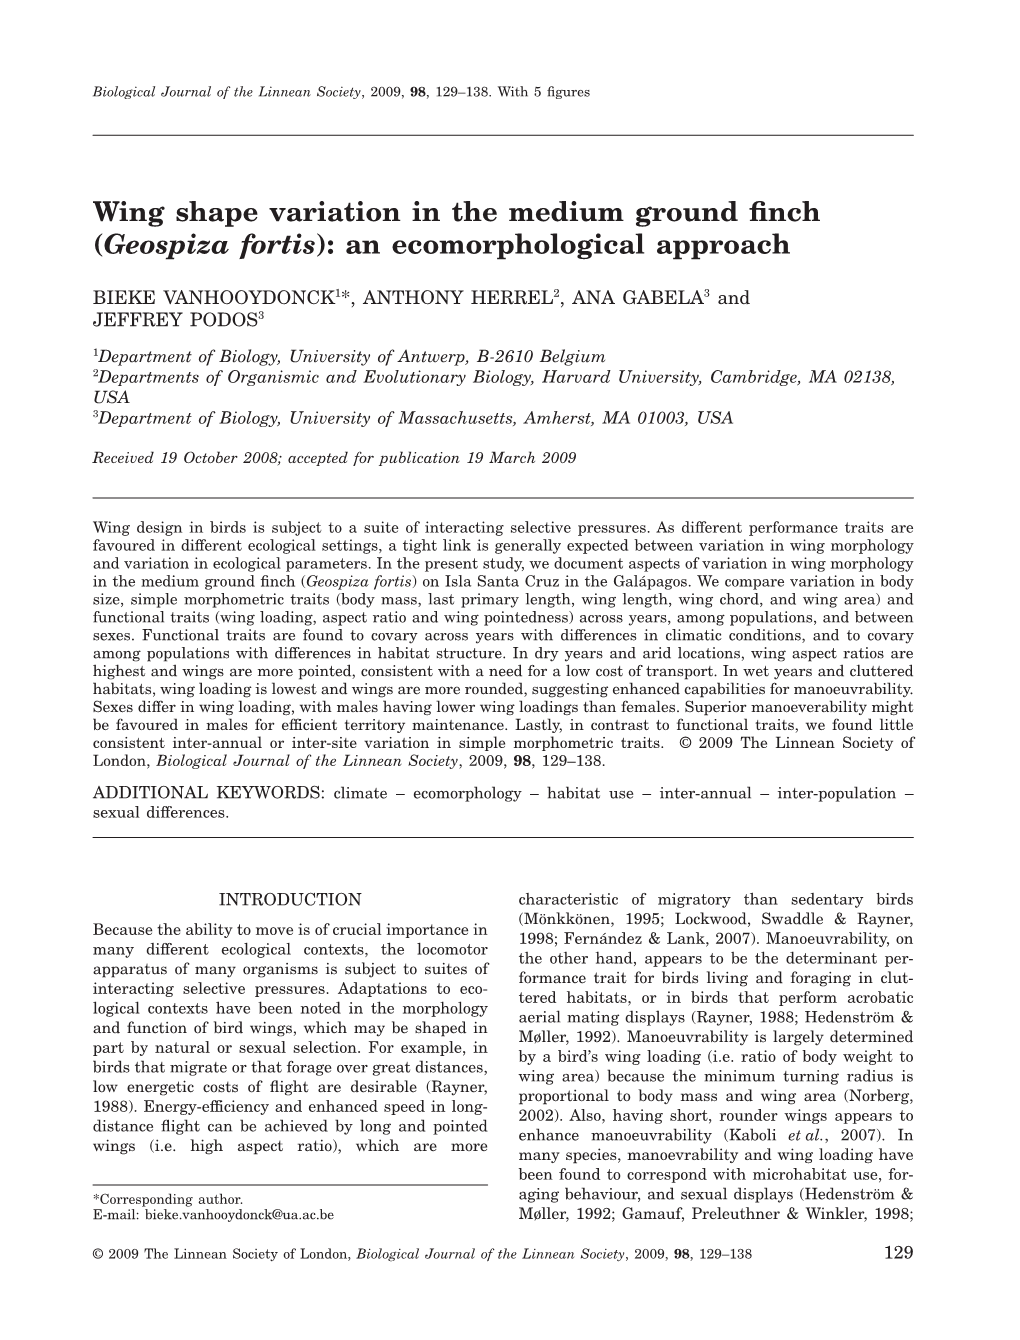 Wing Shape Variation in the Medium Ground Finch (Geospiza Fortis): An